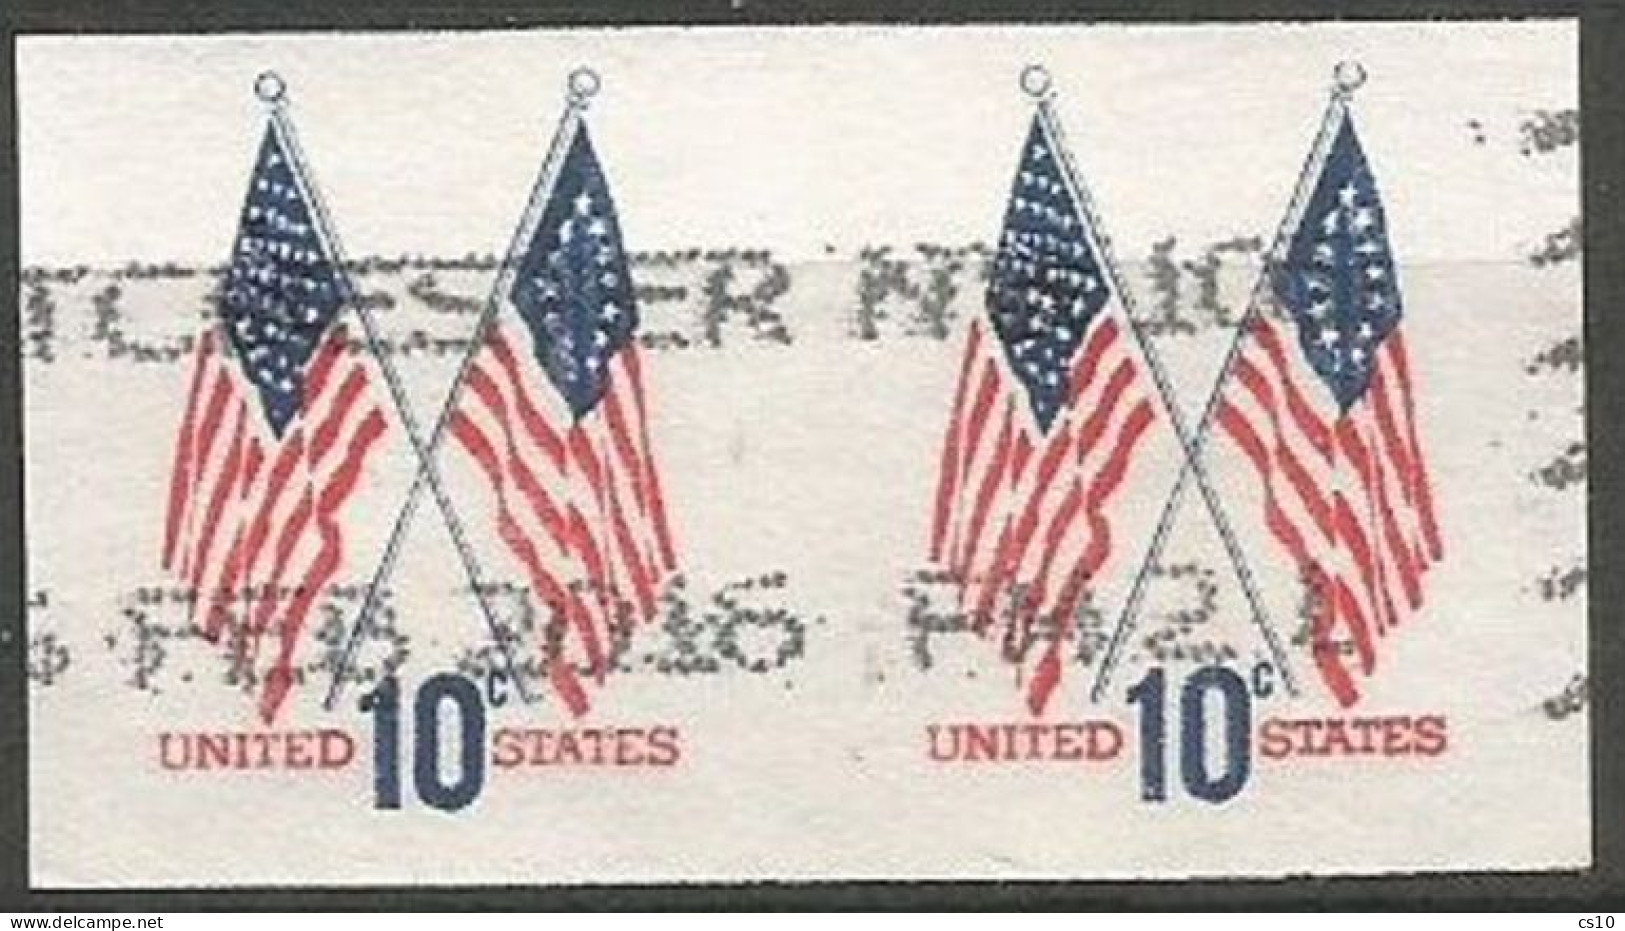 USA 1973 Crossed Flags Regular Issue - Nice Variety On Coil Pair IMPERFORATED - SC.#1519a - Used - Errors, Freaks & Oddities (EFOs)